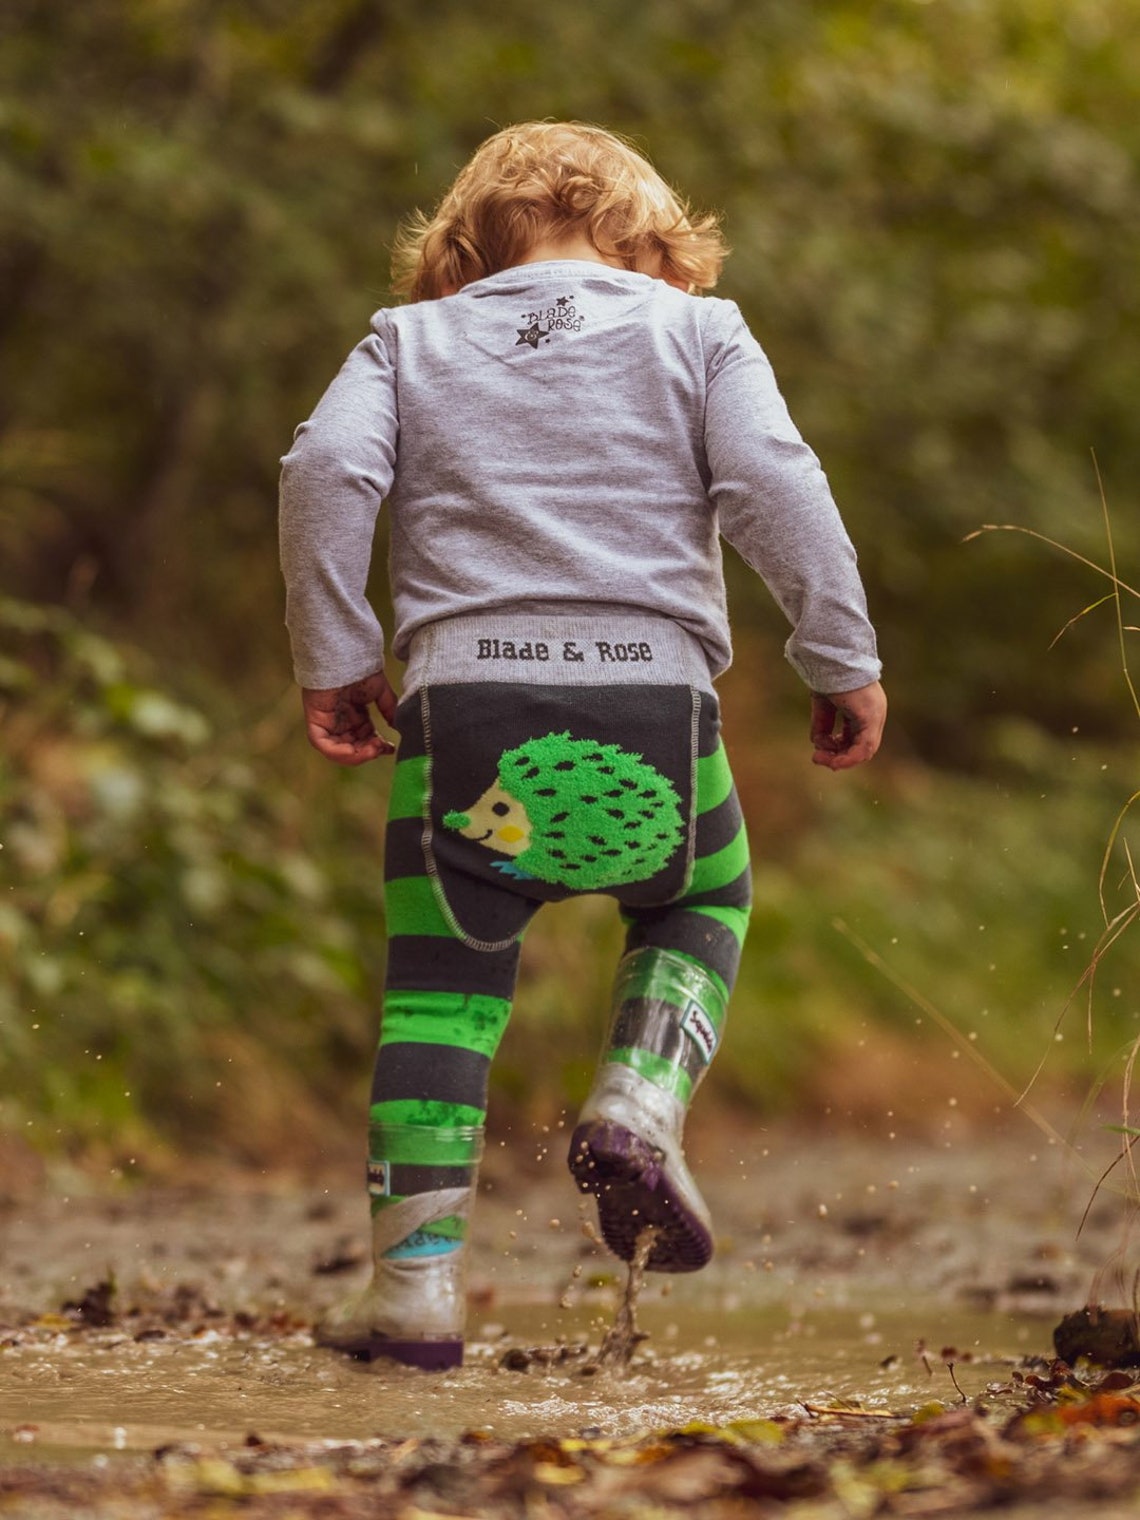 Image shows cute baby leggings with hedgehog design on the bum.